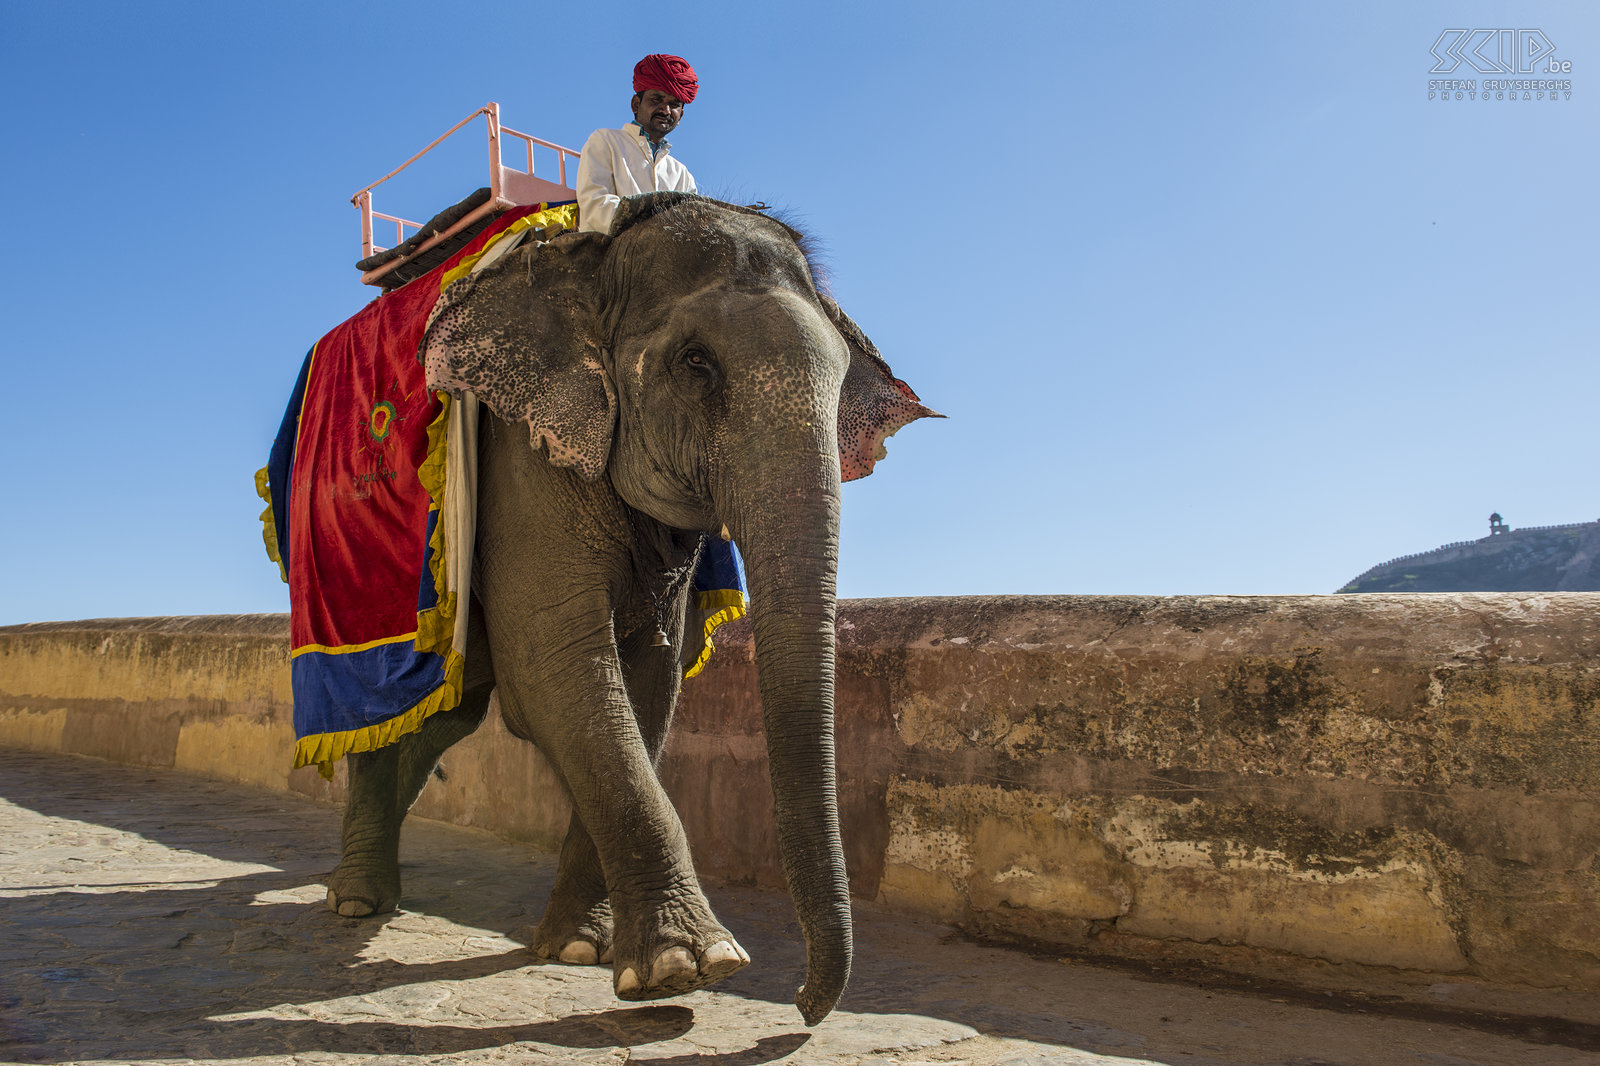 Jaipur - Amber fort - Elephant From the road you can reach the fortress on foot in 10 minutes. You can also let yourself be transported on the back of decorated and painted elephants. Stefan Cruysberghs